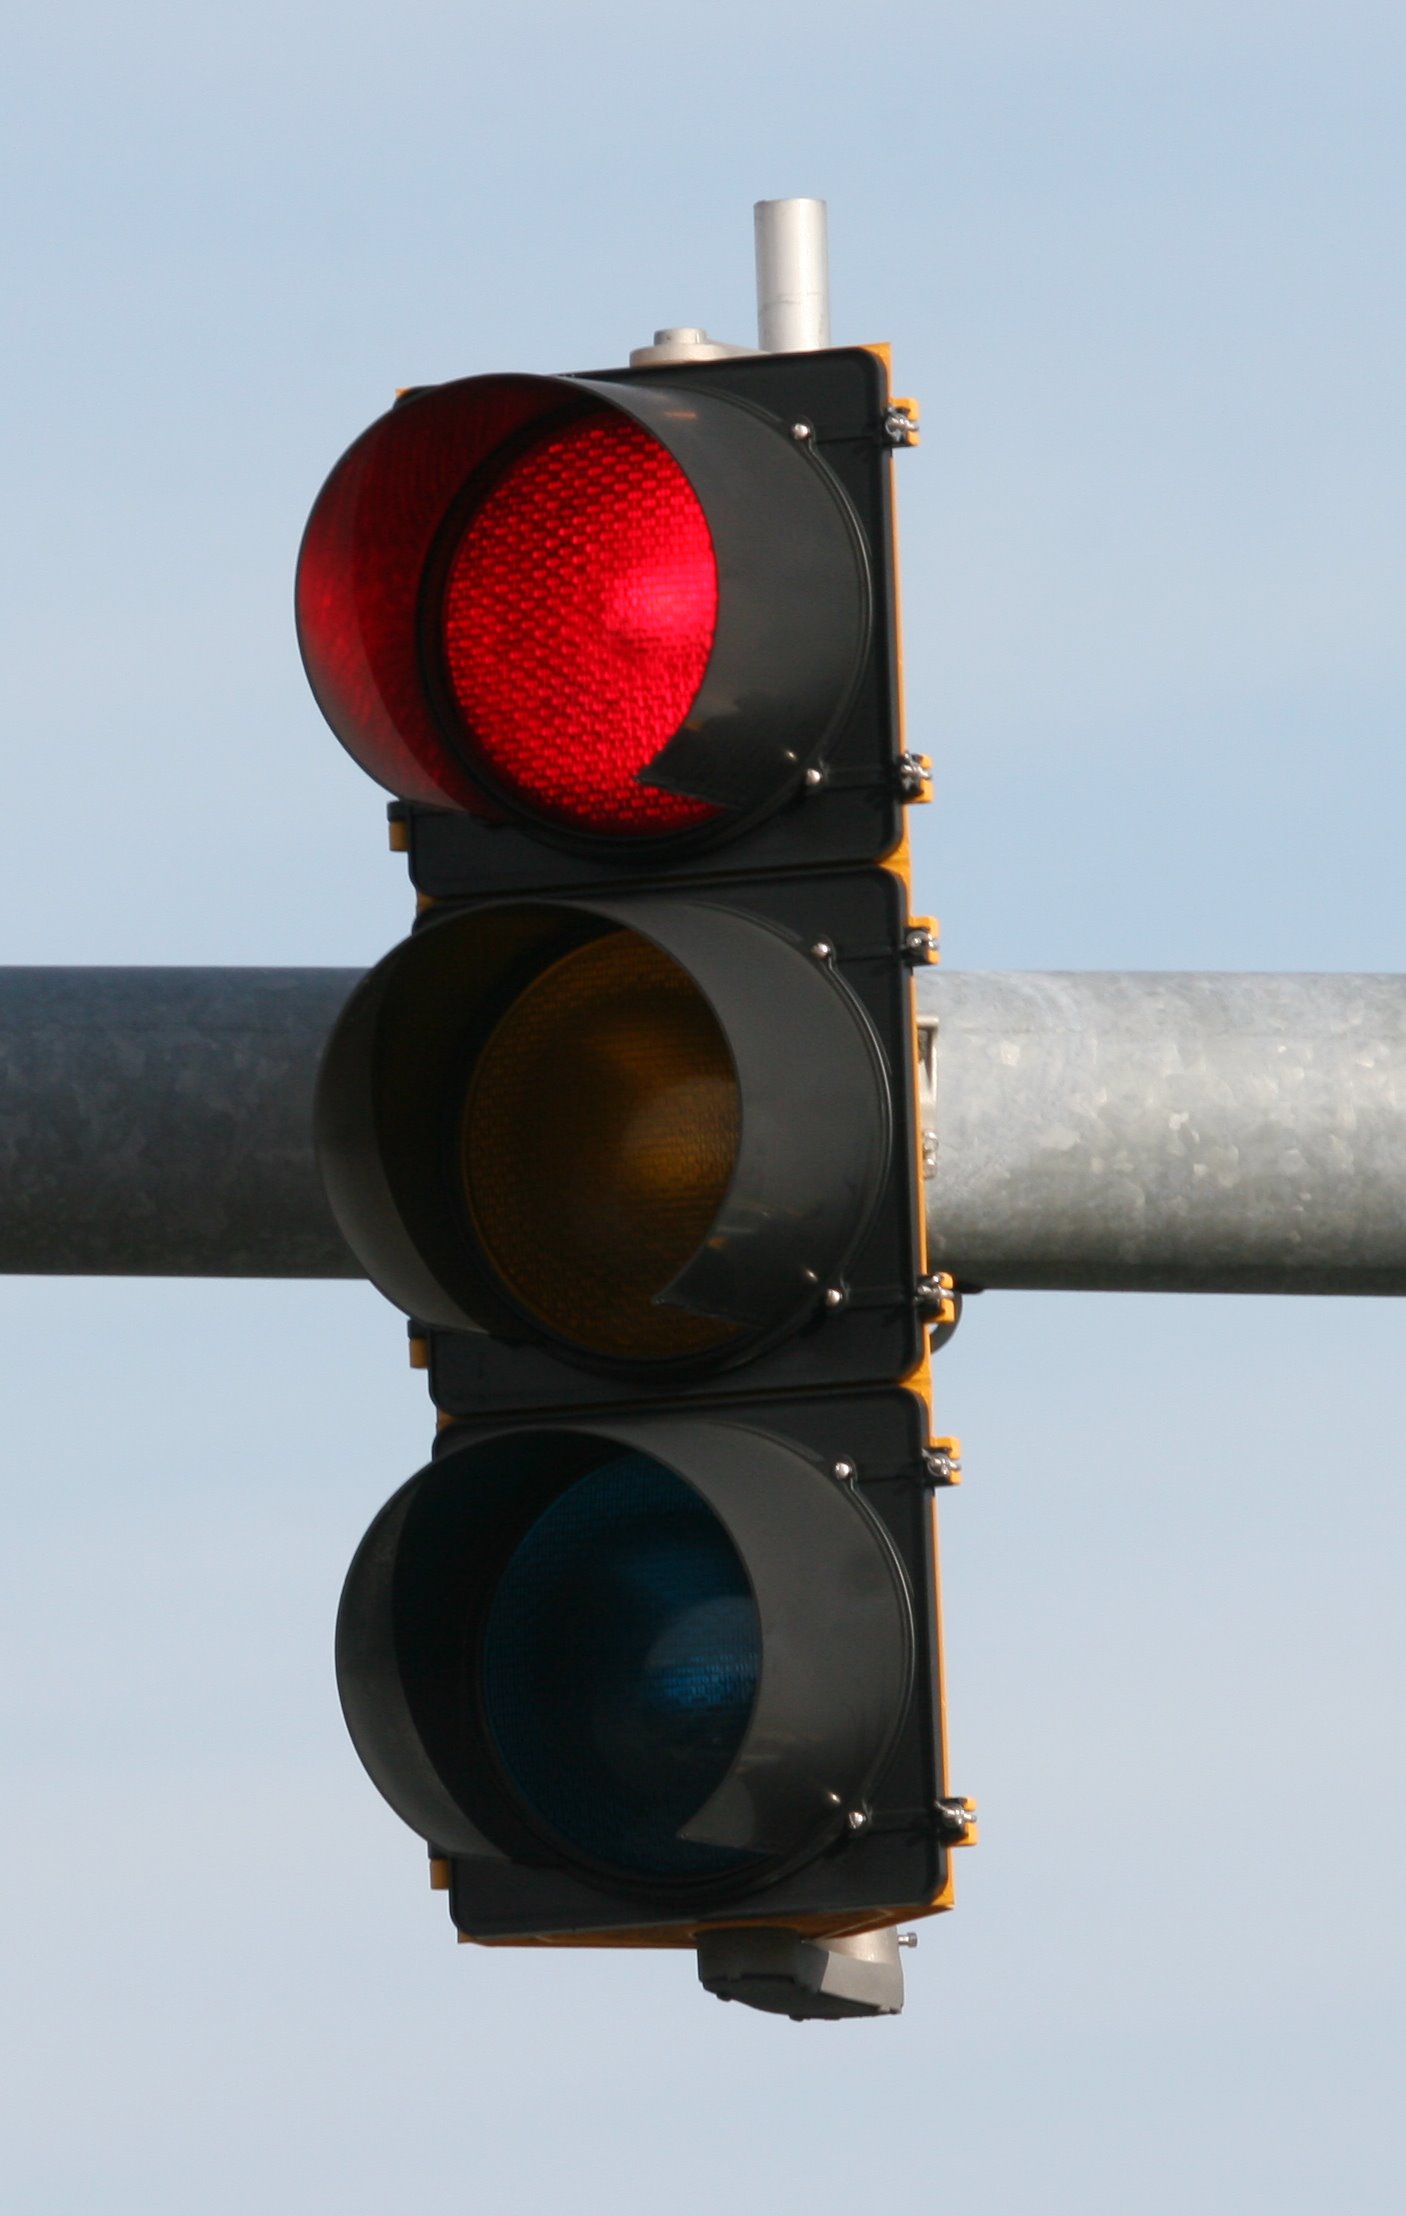 Red Traffic Signal motorcycles - Motorcyclists In Washington State Get Green Light To Cautiously Go Through Stale Red Lights, Says NY and PA Motorcycle Law Lawyer